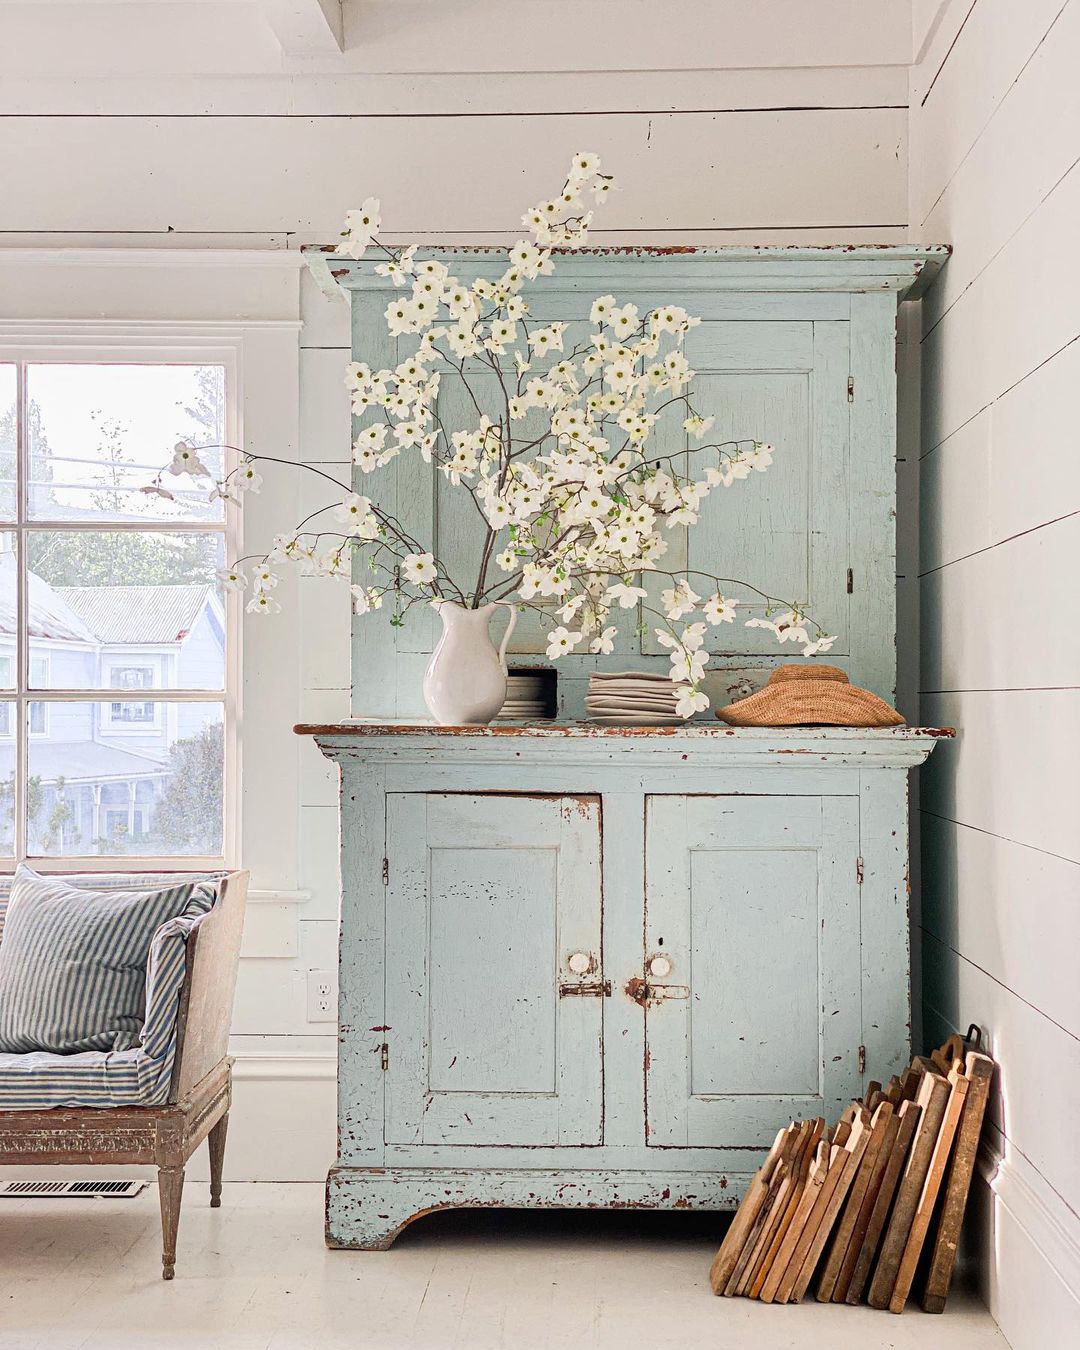 Rustic Teal Colored Cupboard in a Farmhouse Dining Room. Photo by Instagram user @dreamywhiteslifestyle